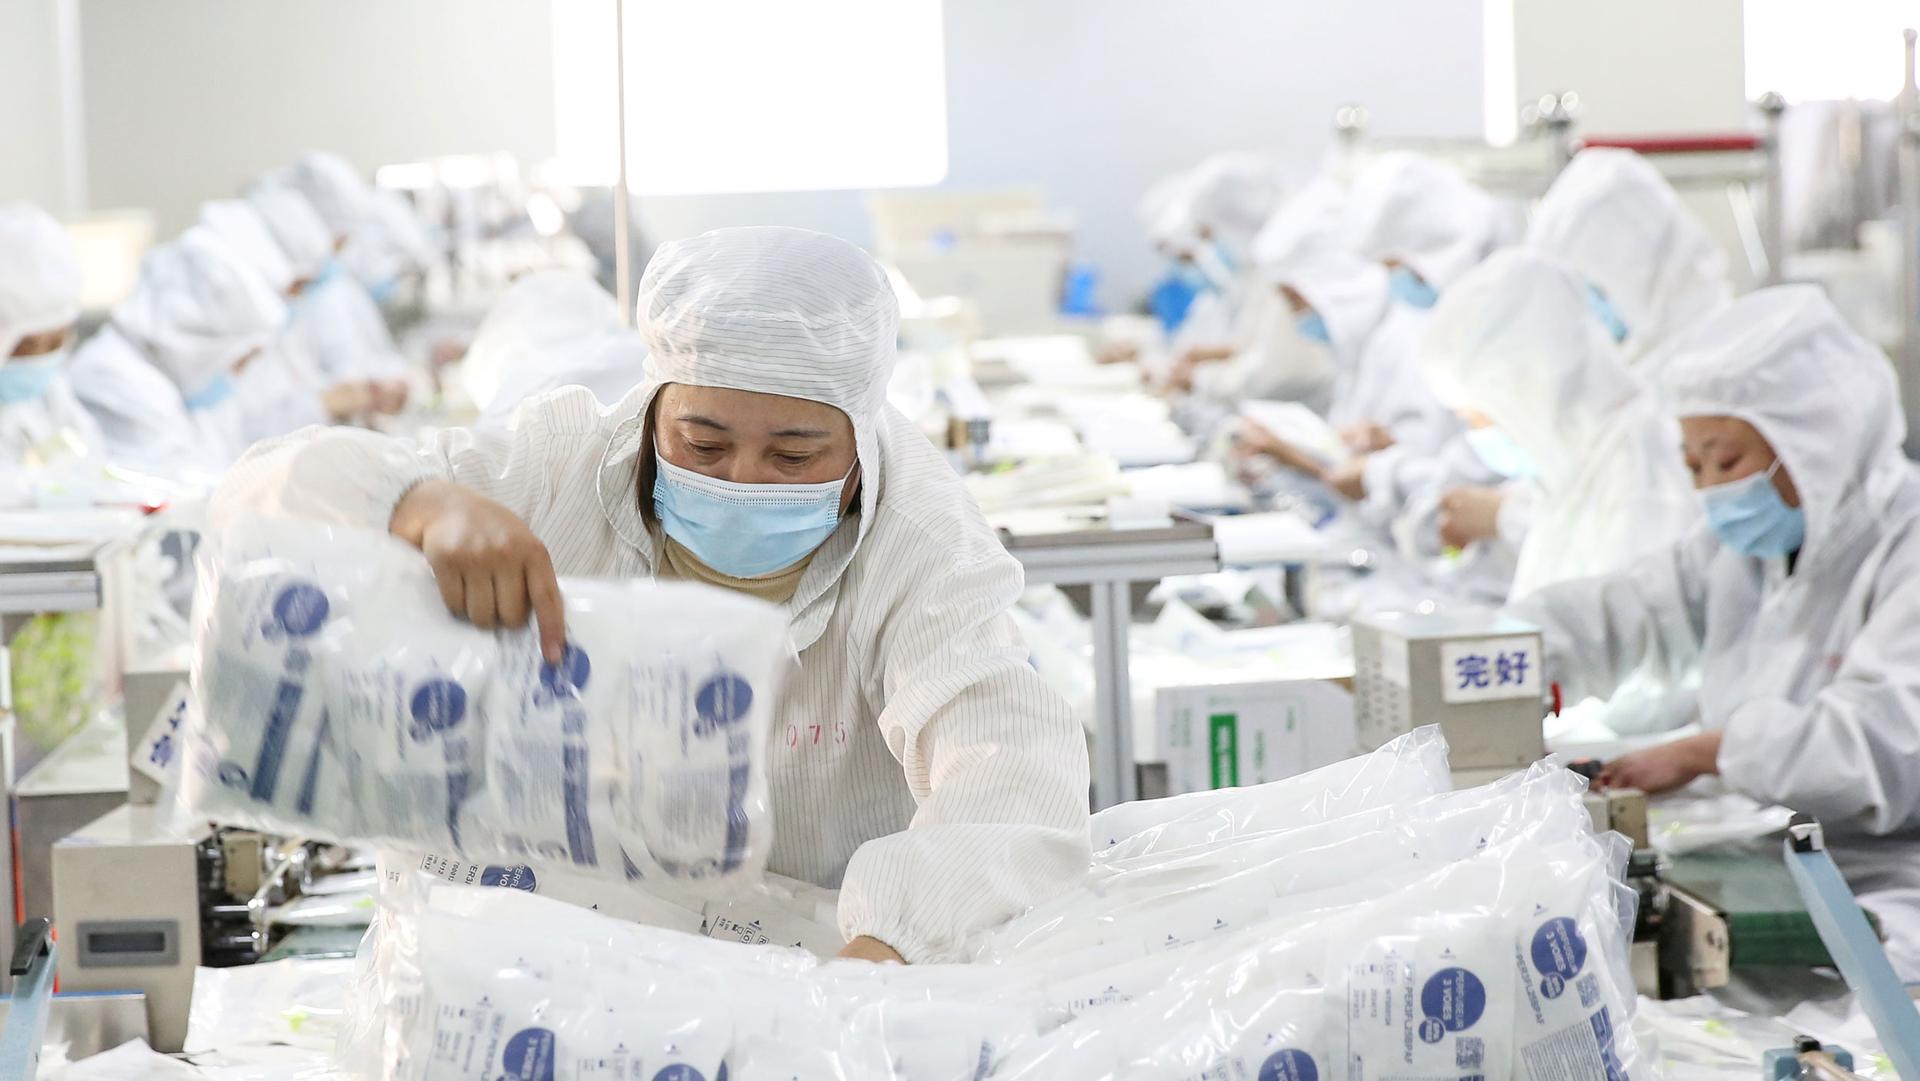 People are shown in all white medical protective gear and face masks while working on a medical supply line.